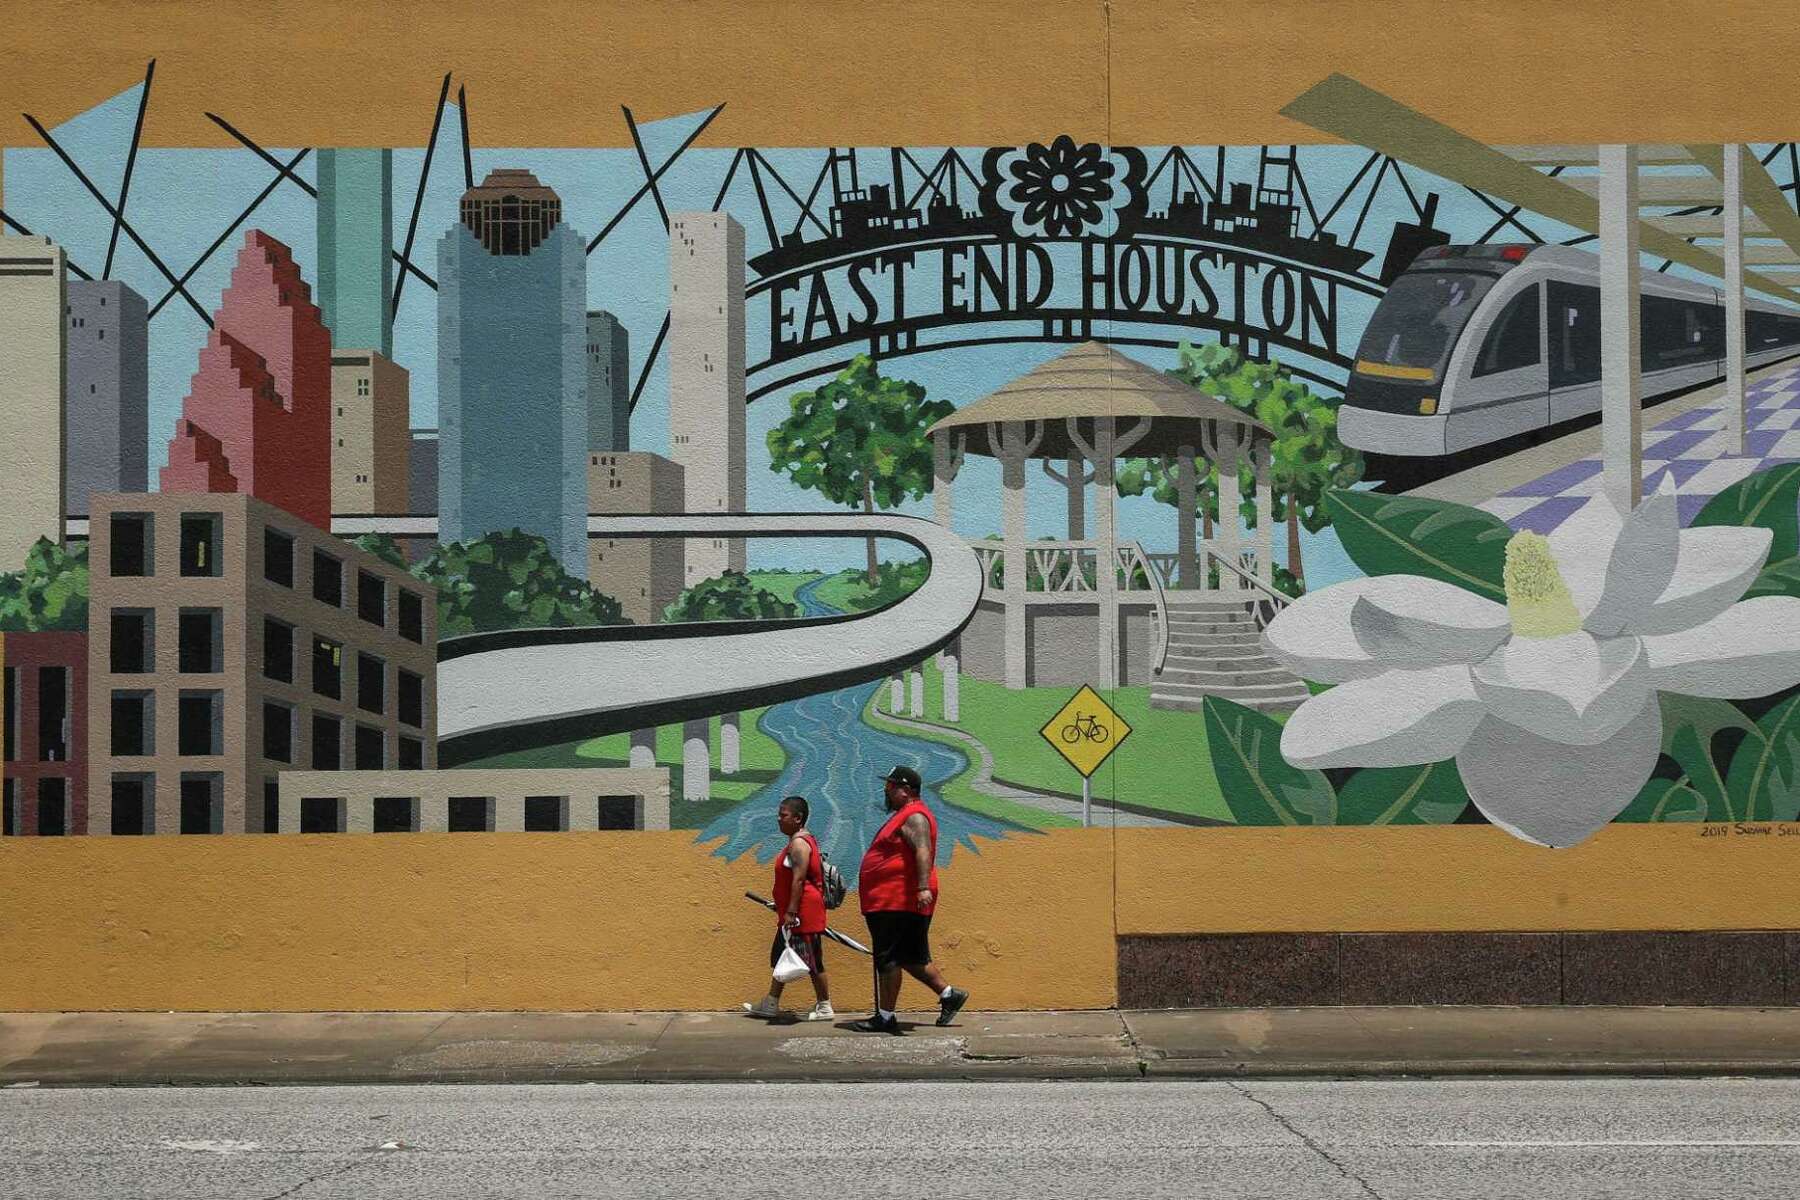 15-facts-about-art-and-culture-in-houston-texas